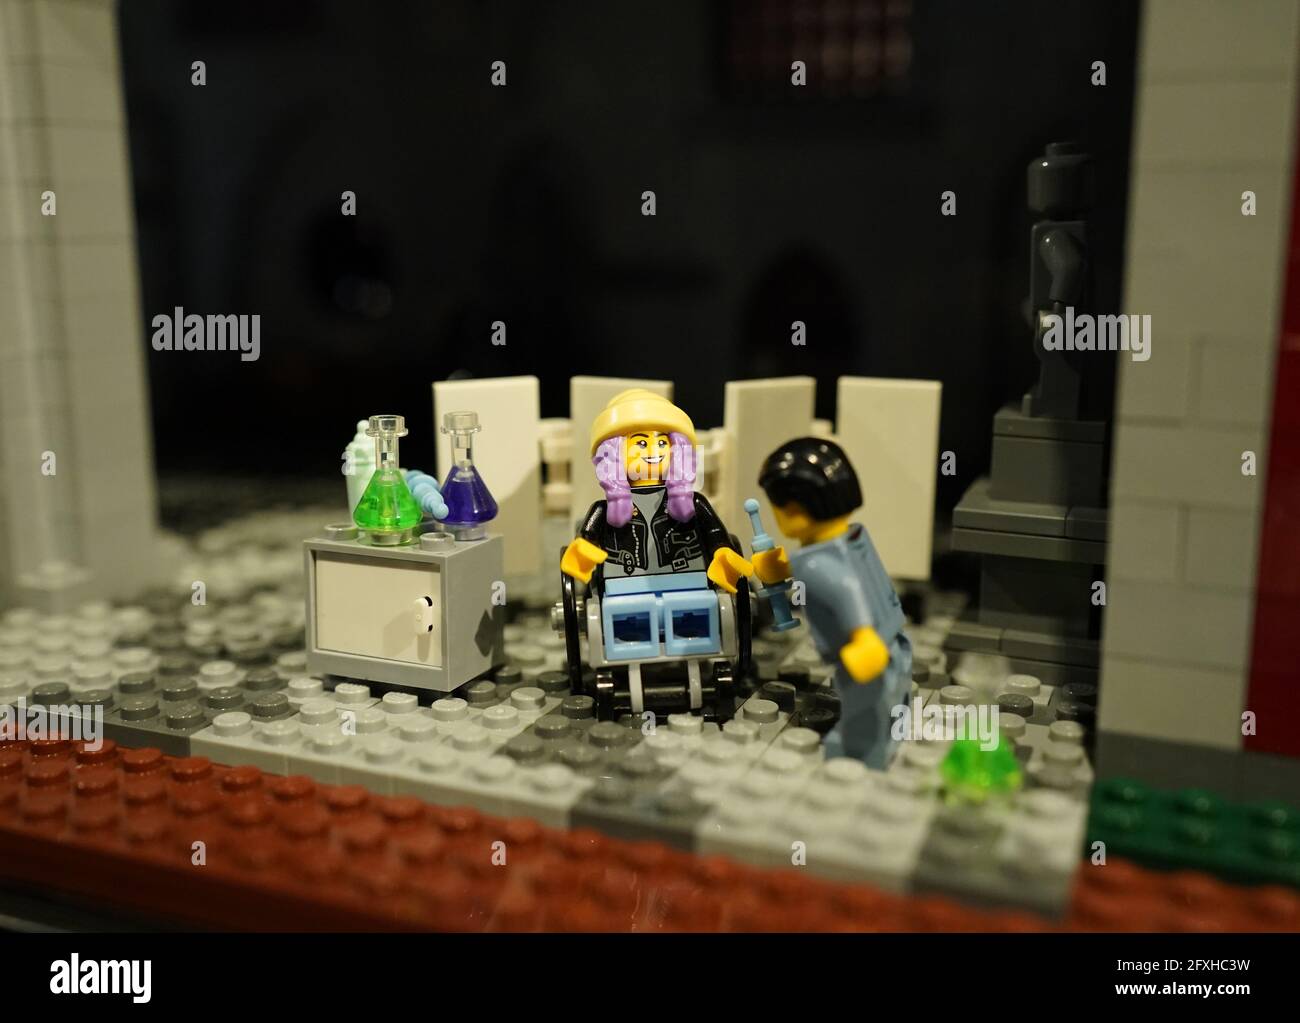 25 May 2021, Schleswig-Holstein, Lübeck: The Lego figure Juna (l) is  inoculated in the diorama "The Plague in Lübeck 1367". The girl Juna is  supposed to playfully point out current and environmental